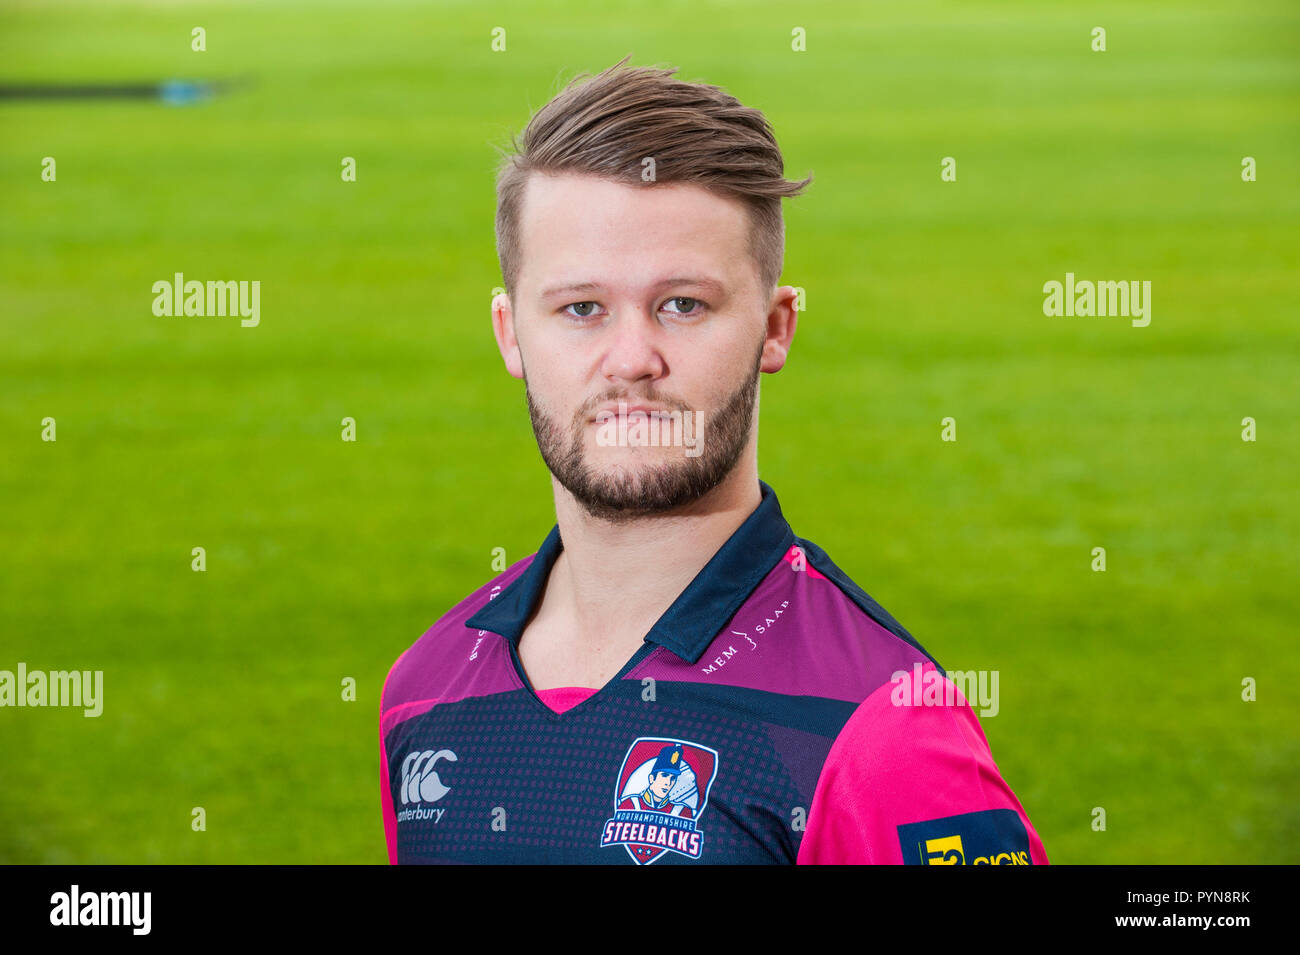 English cricketer, Ben Duckett who plays for Northamptonshire. © Lucy Young 2018 07799118984 lucyyounguk@gmail.com www.lucyyoungphotos.co.uk Stock Photo